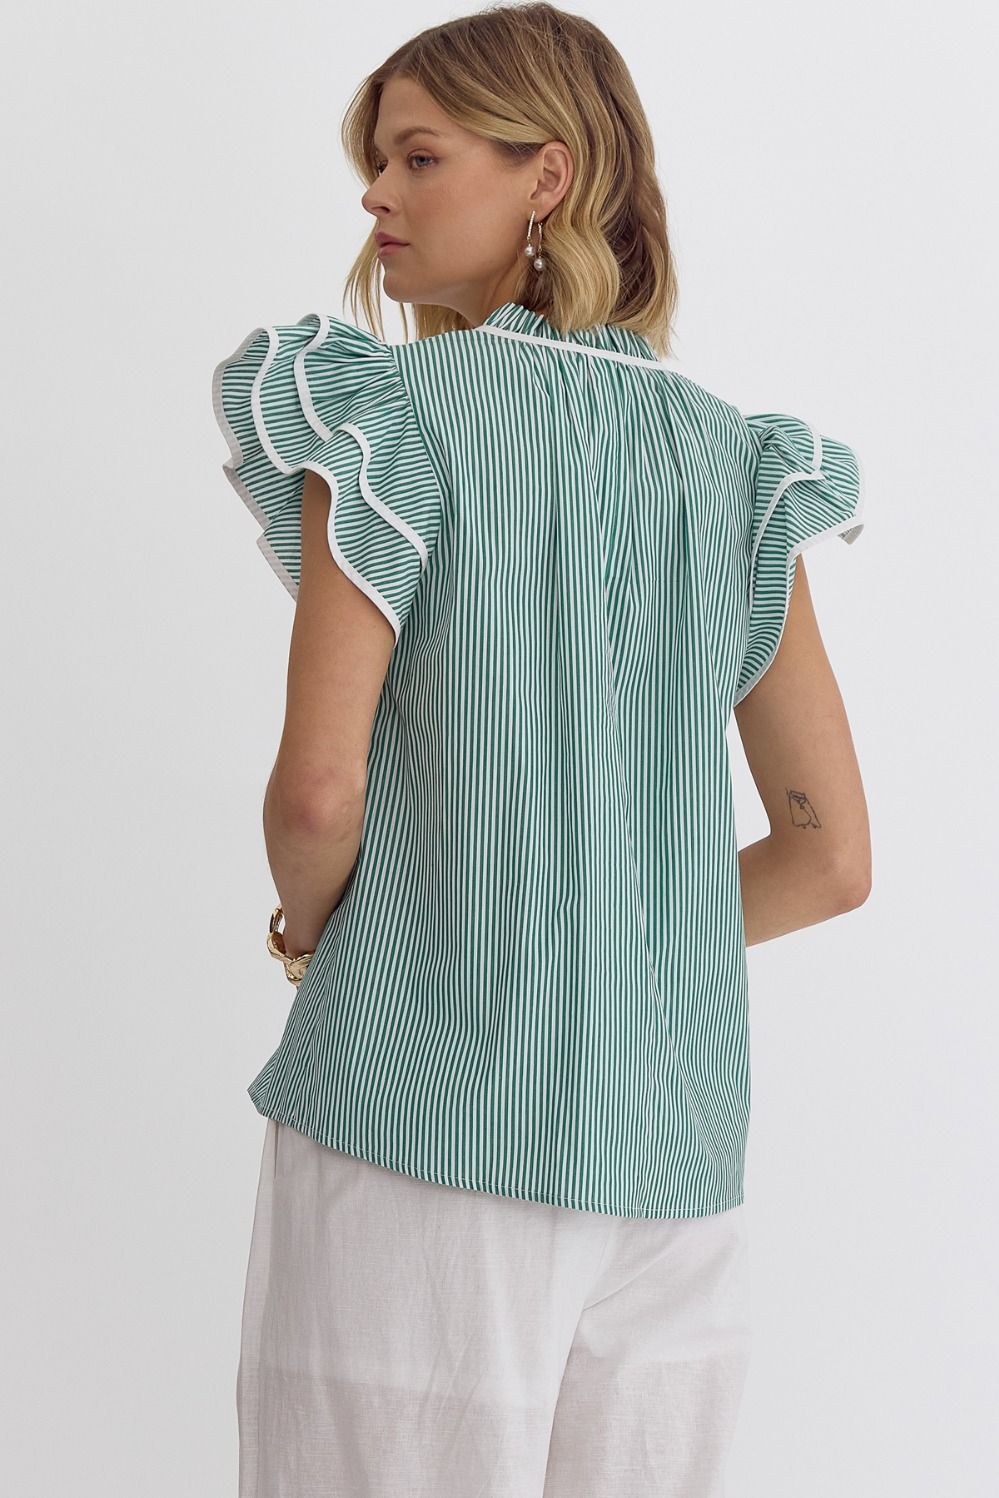 STRIPED VNECK TOP W/ RUFFLED SLEEVES AND TIE NECKLINE